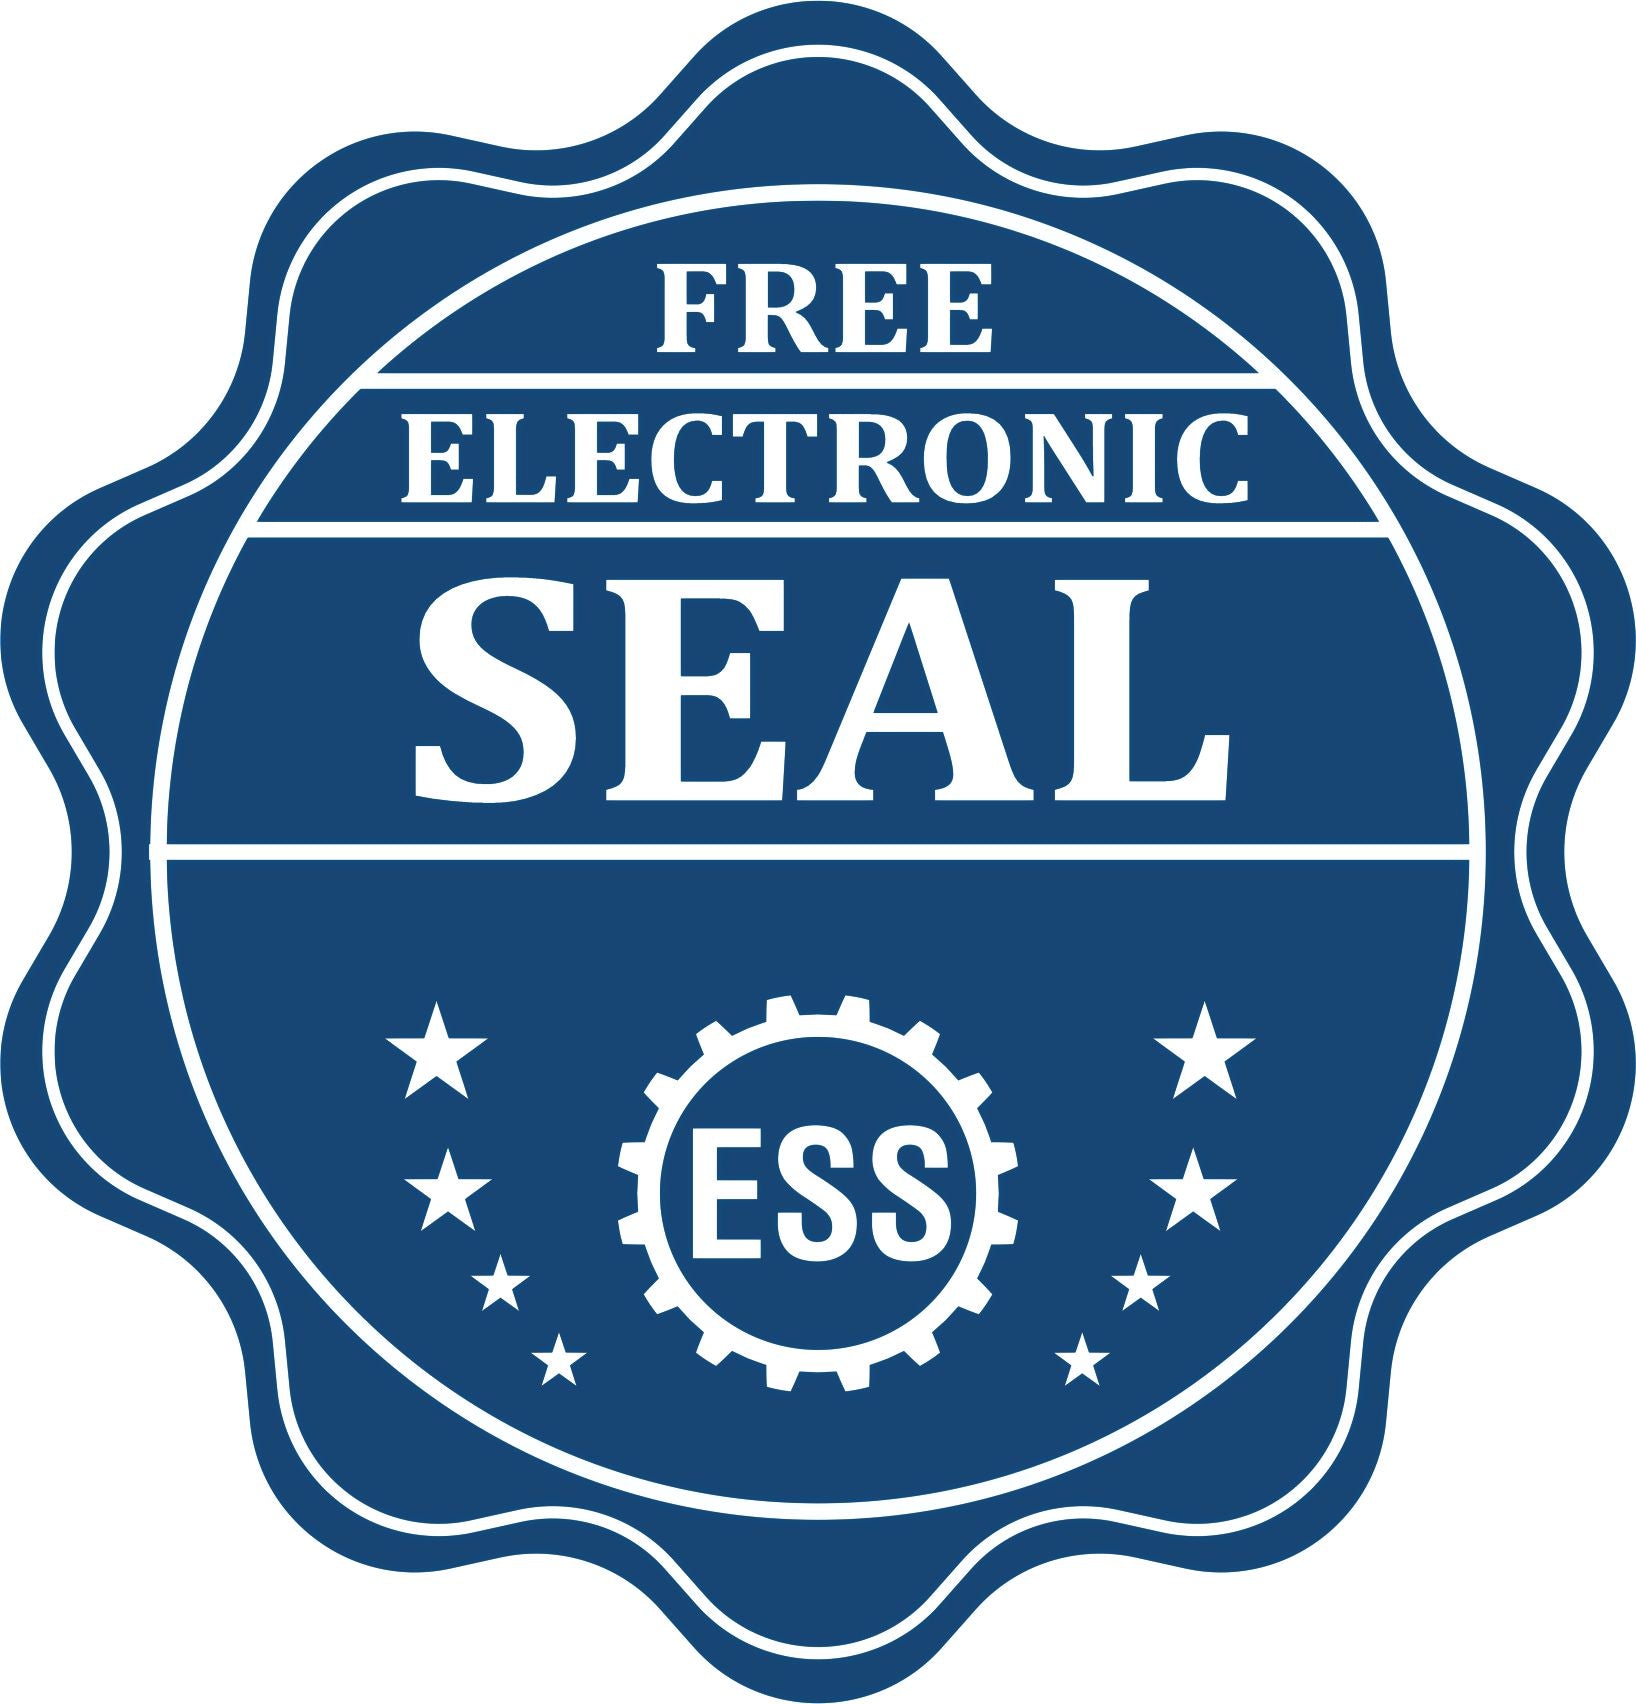 A badge showing a free electronic seal for the Slim Pre-Inked South Carolina Professional Engineer Seal Stamp with stars and the ESS gear on the emblem.